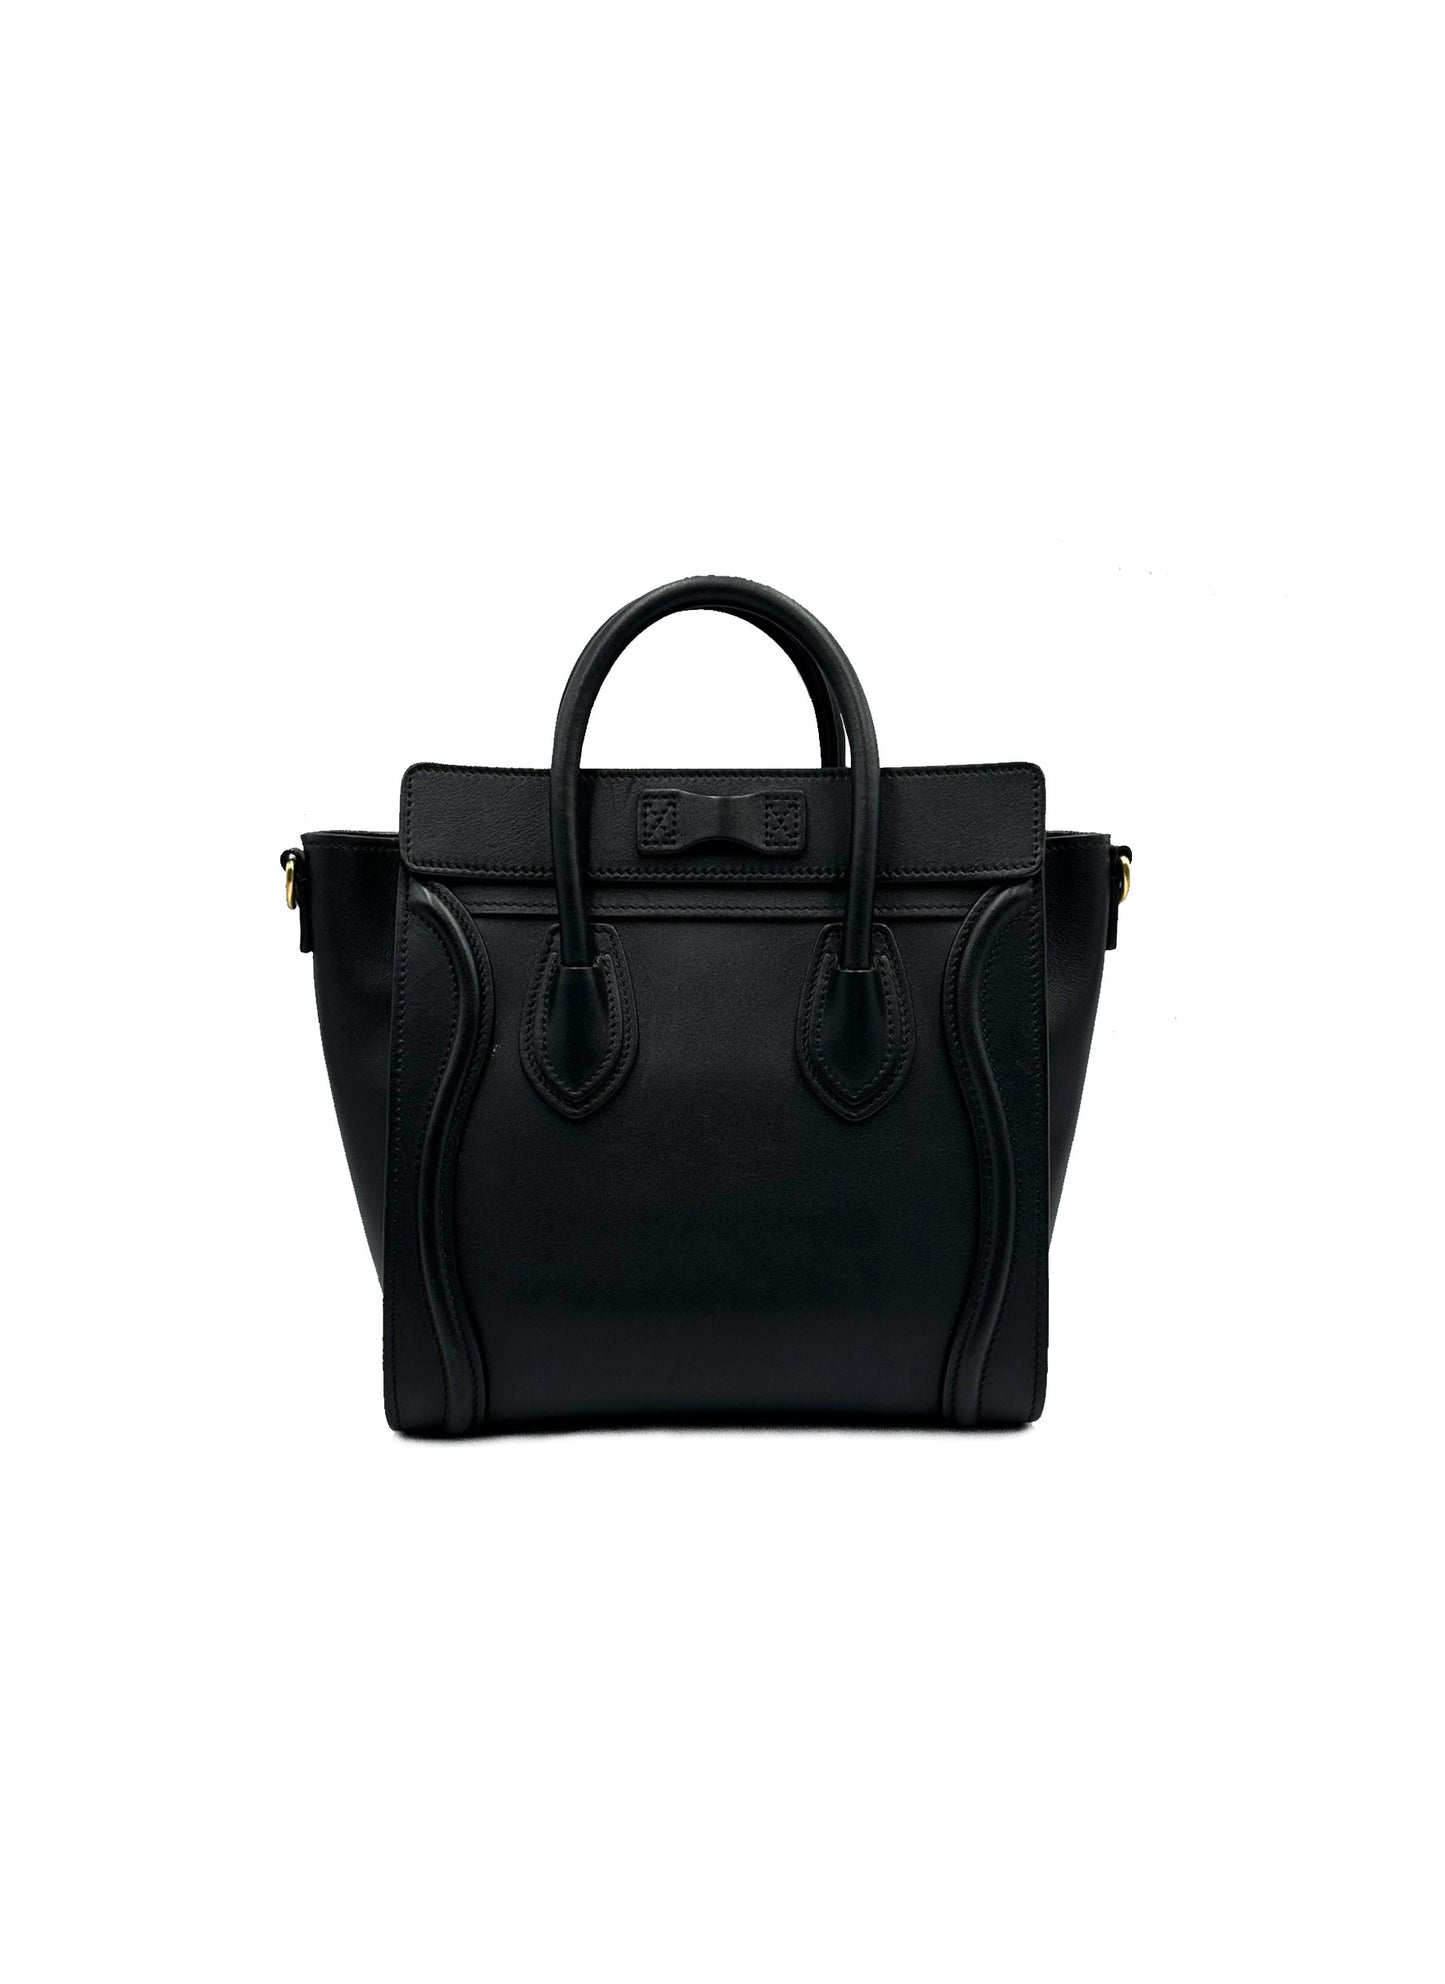 【Preowned】CELINE Luggage 笑臉包